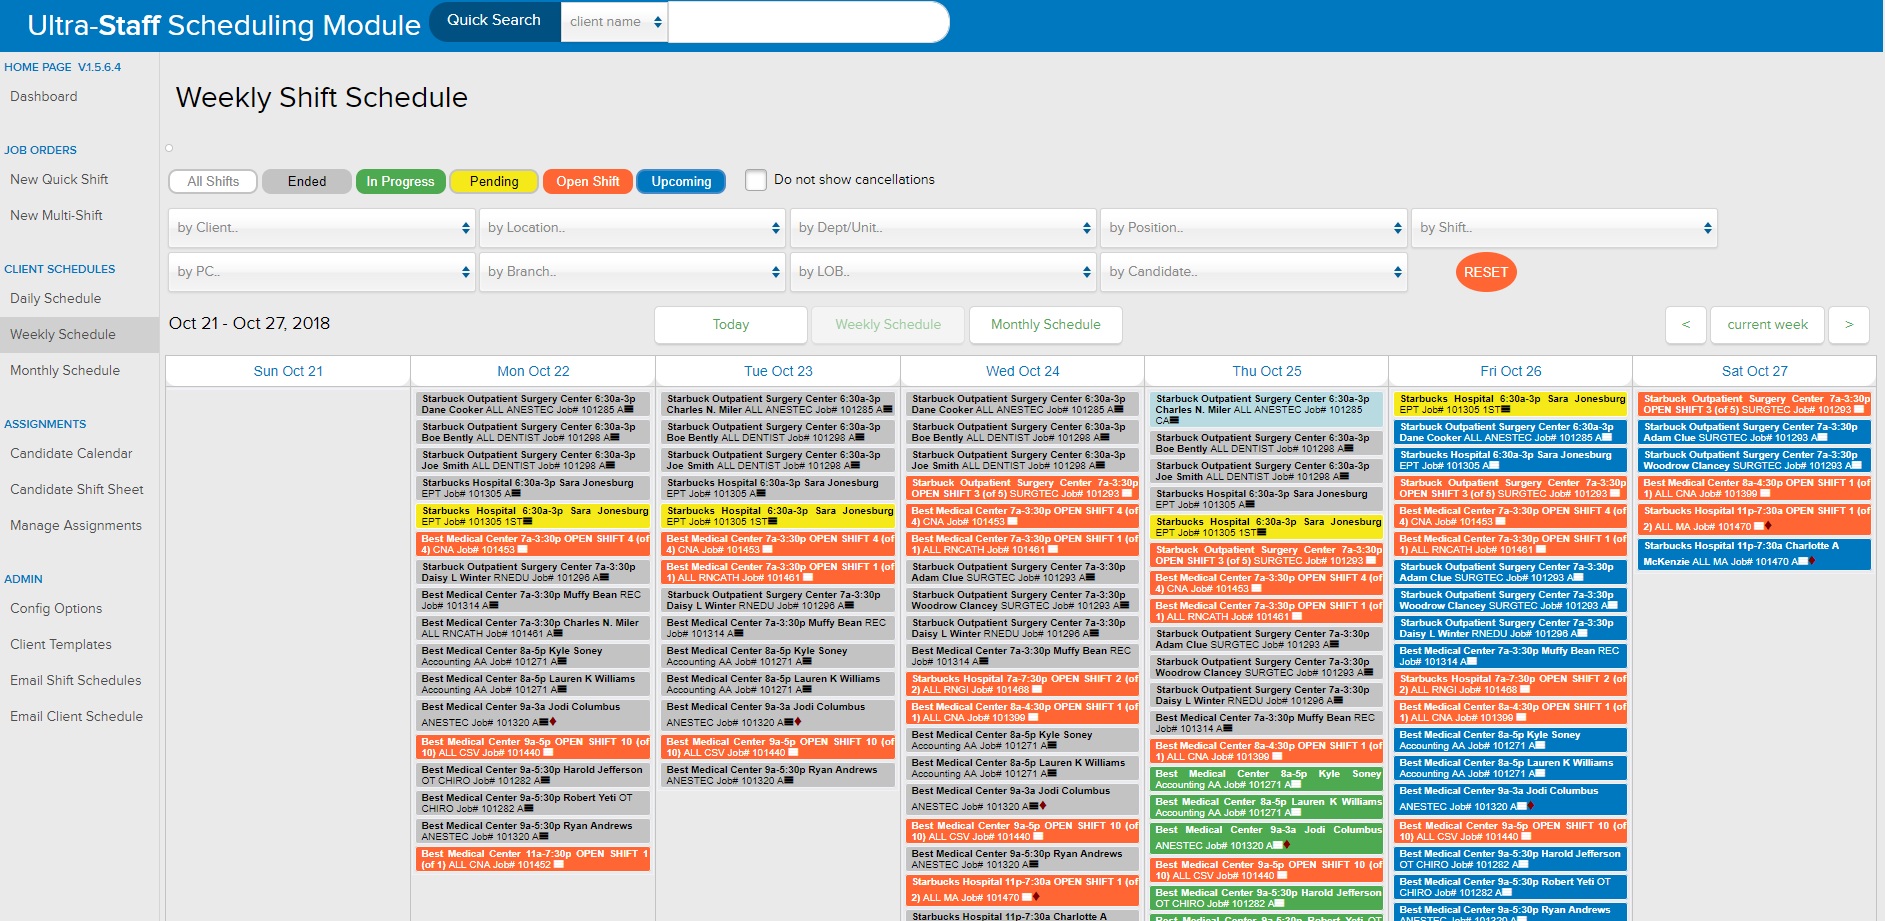 The Ultra-Staff EDGE Scheduling Module is designed to simplify medical staffing needs for per diem and travel nursing. The shift scheduling module handles multi-shift, shift differentials, credentialing, work schedules, and more.